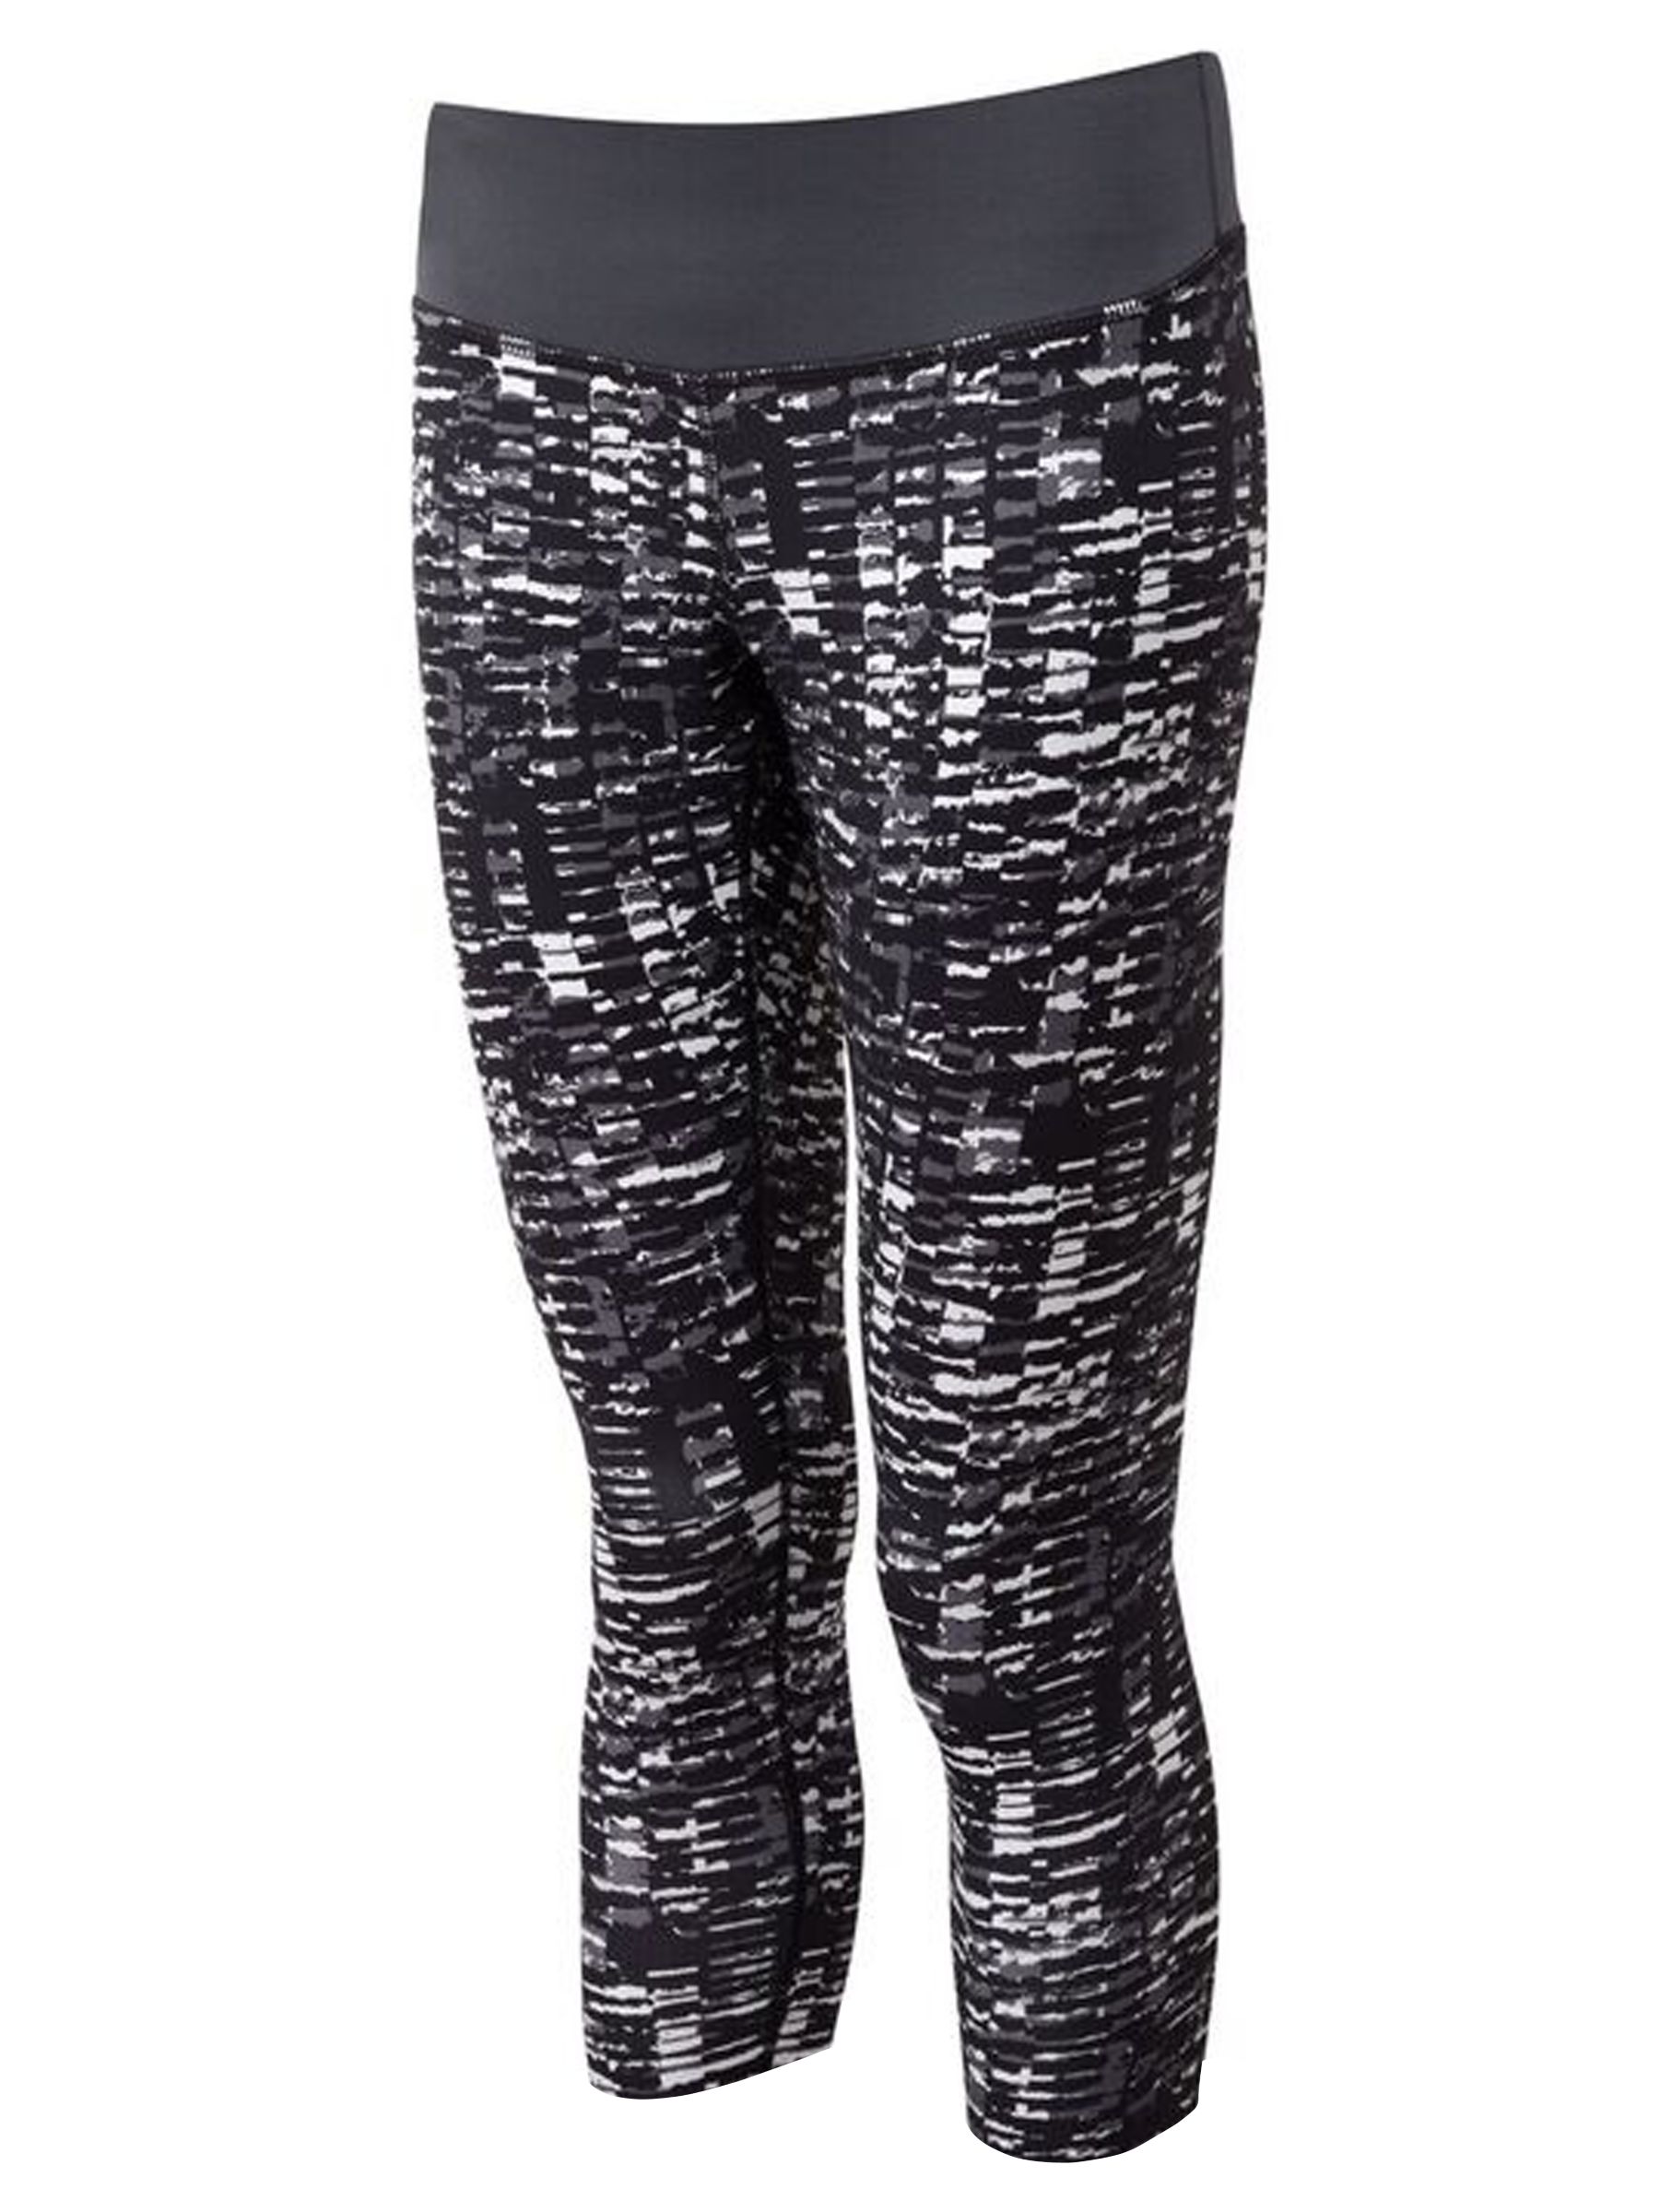 Ronhill Momentum Cropped Running Tights, Grey Sponge, 12